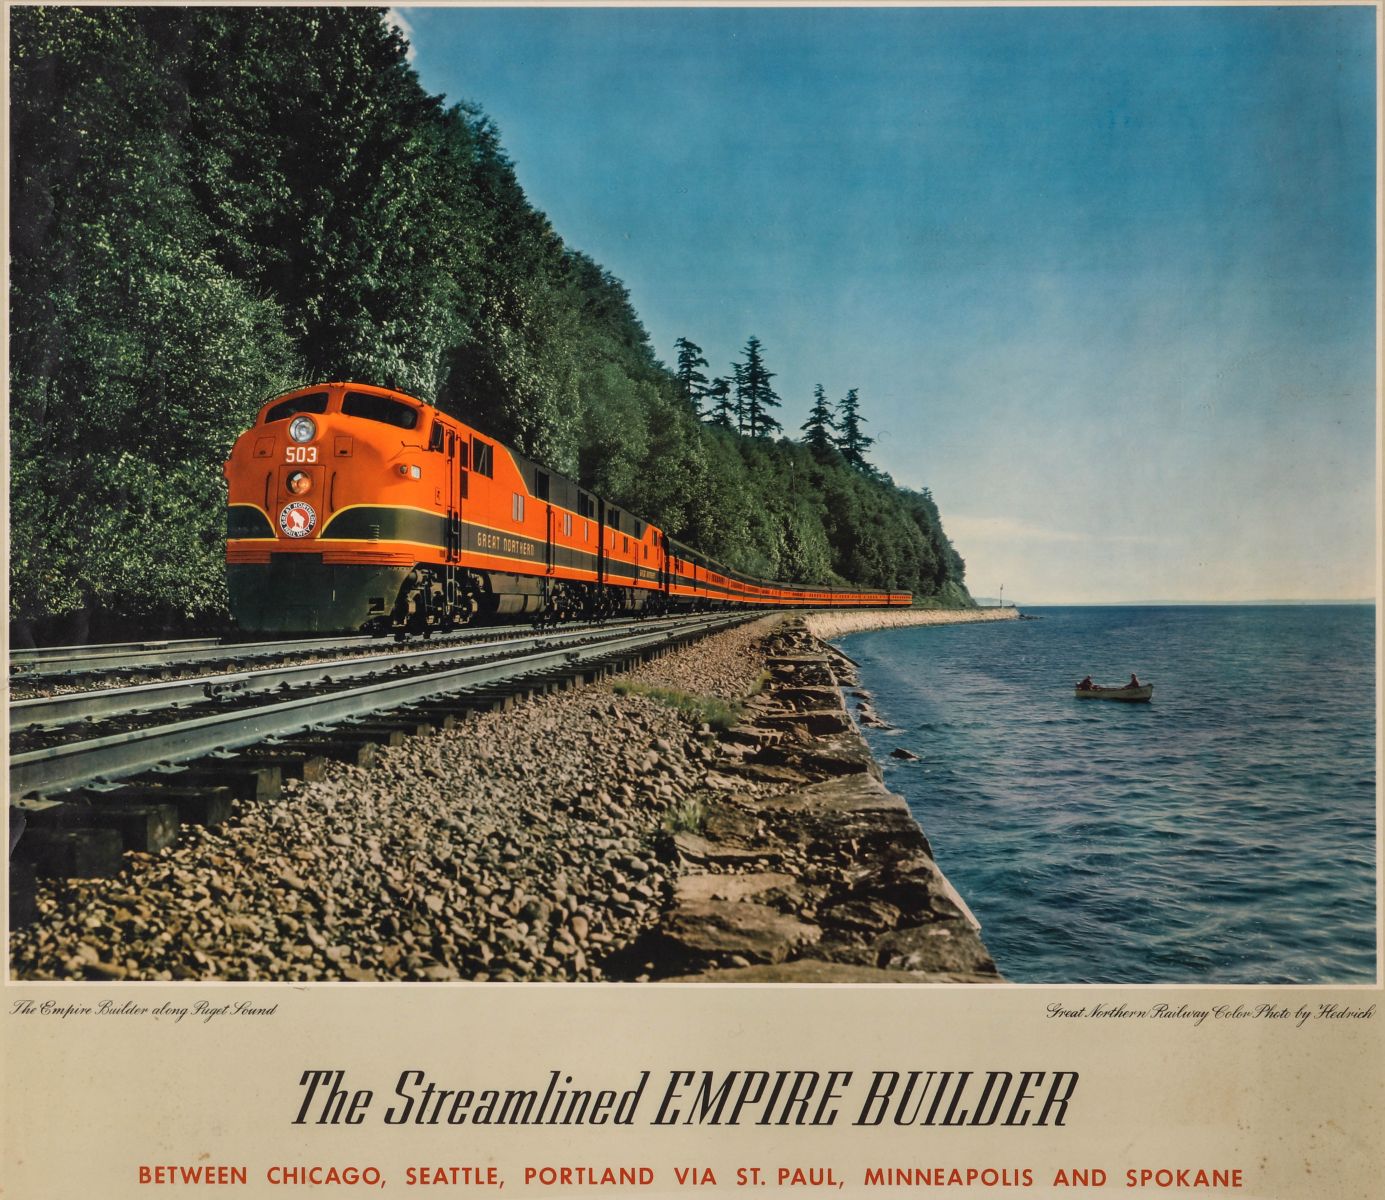 A POSTER FOR GREAT NORTHERN STREAMLINER EMPIRE BUILDER